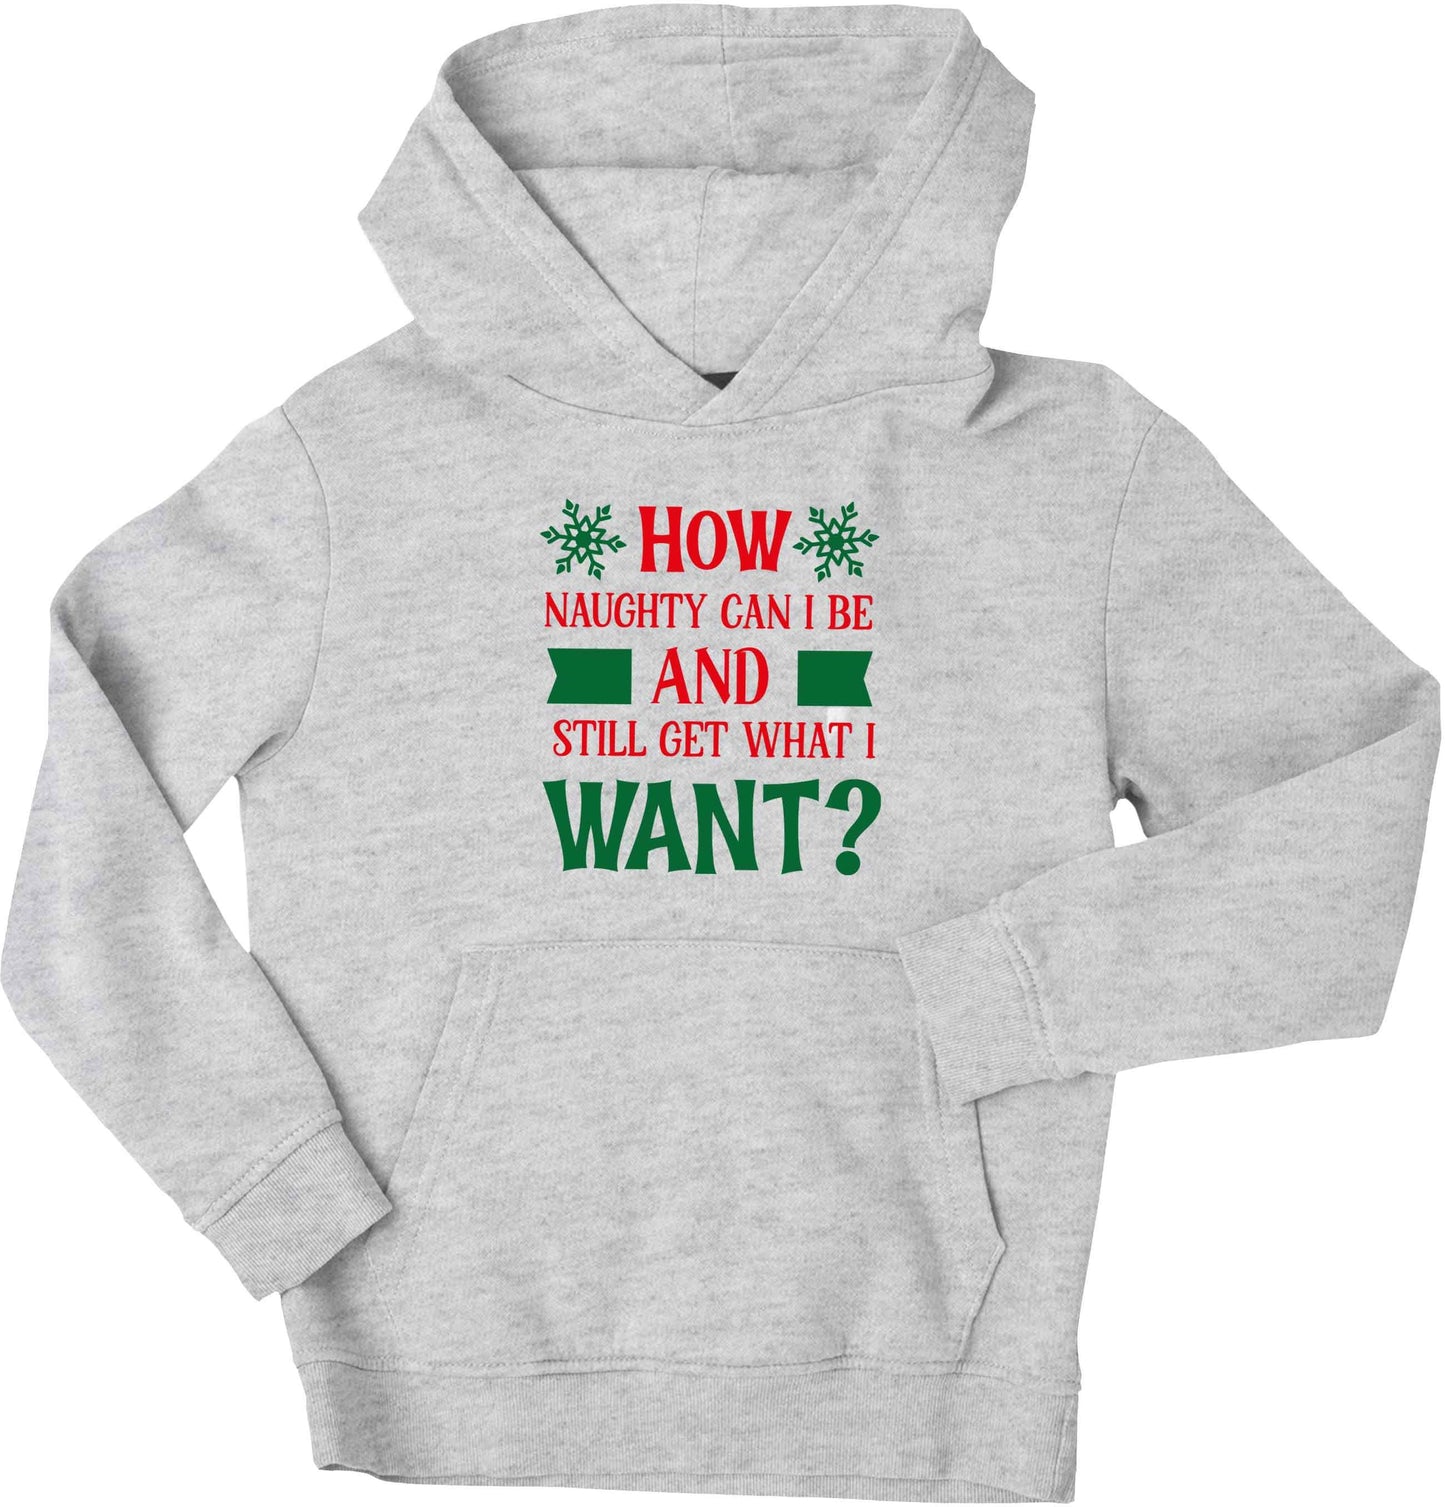 How naughty can I be and still get what I want? children's grey hoodie 12-13 Years